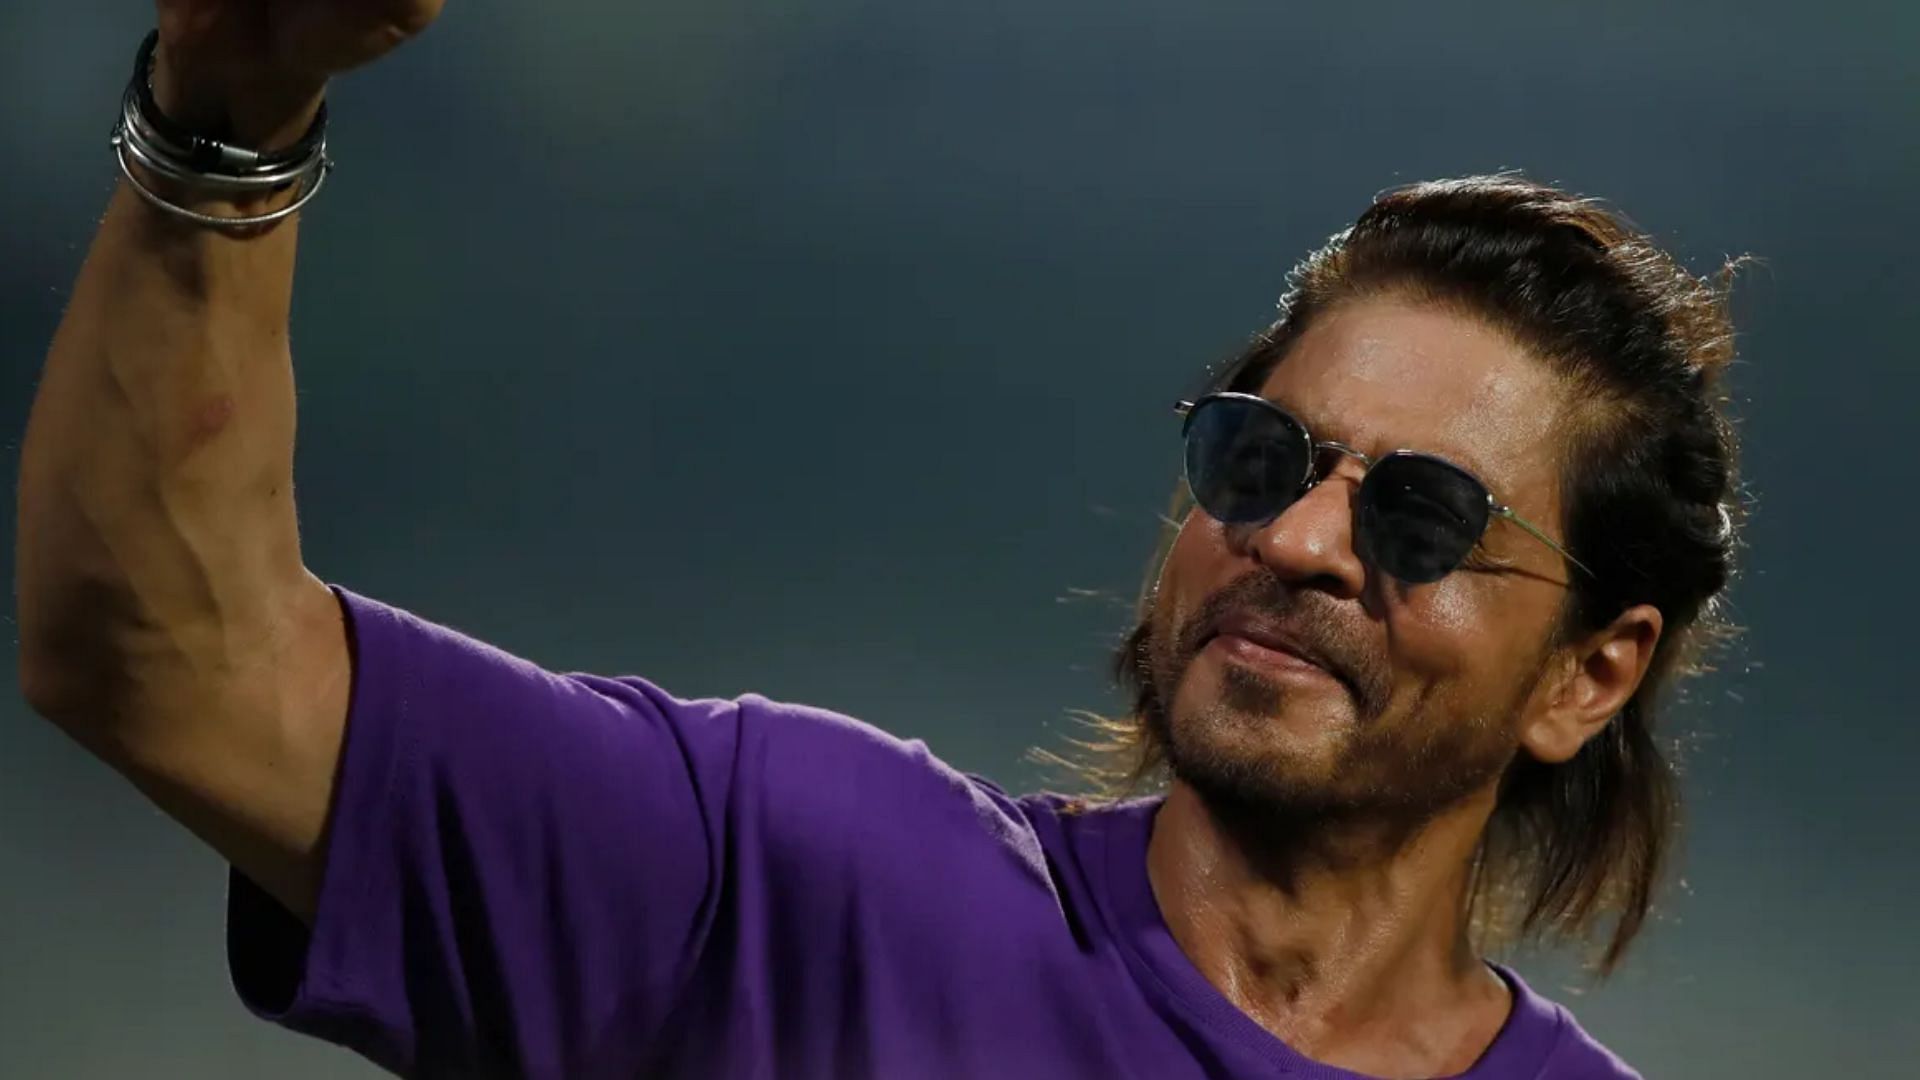 Shahrukh Khan was all smiles after KKR